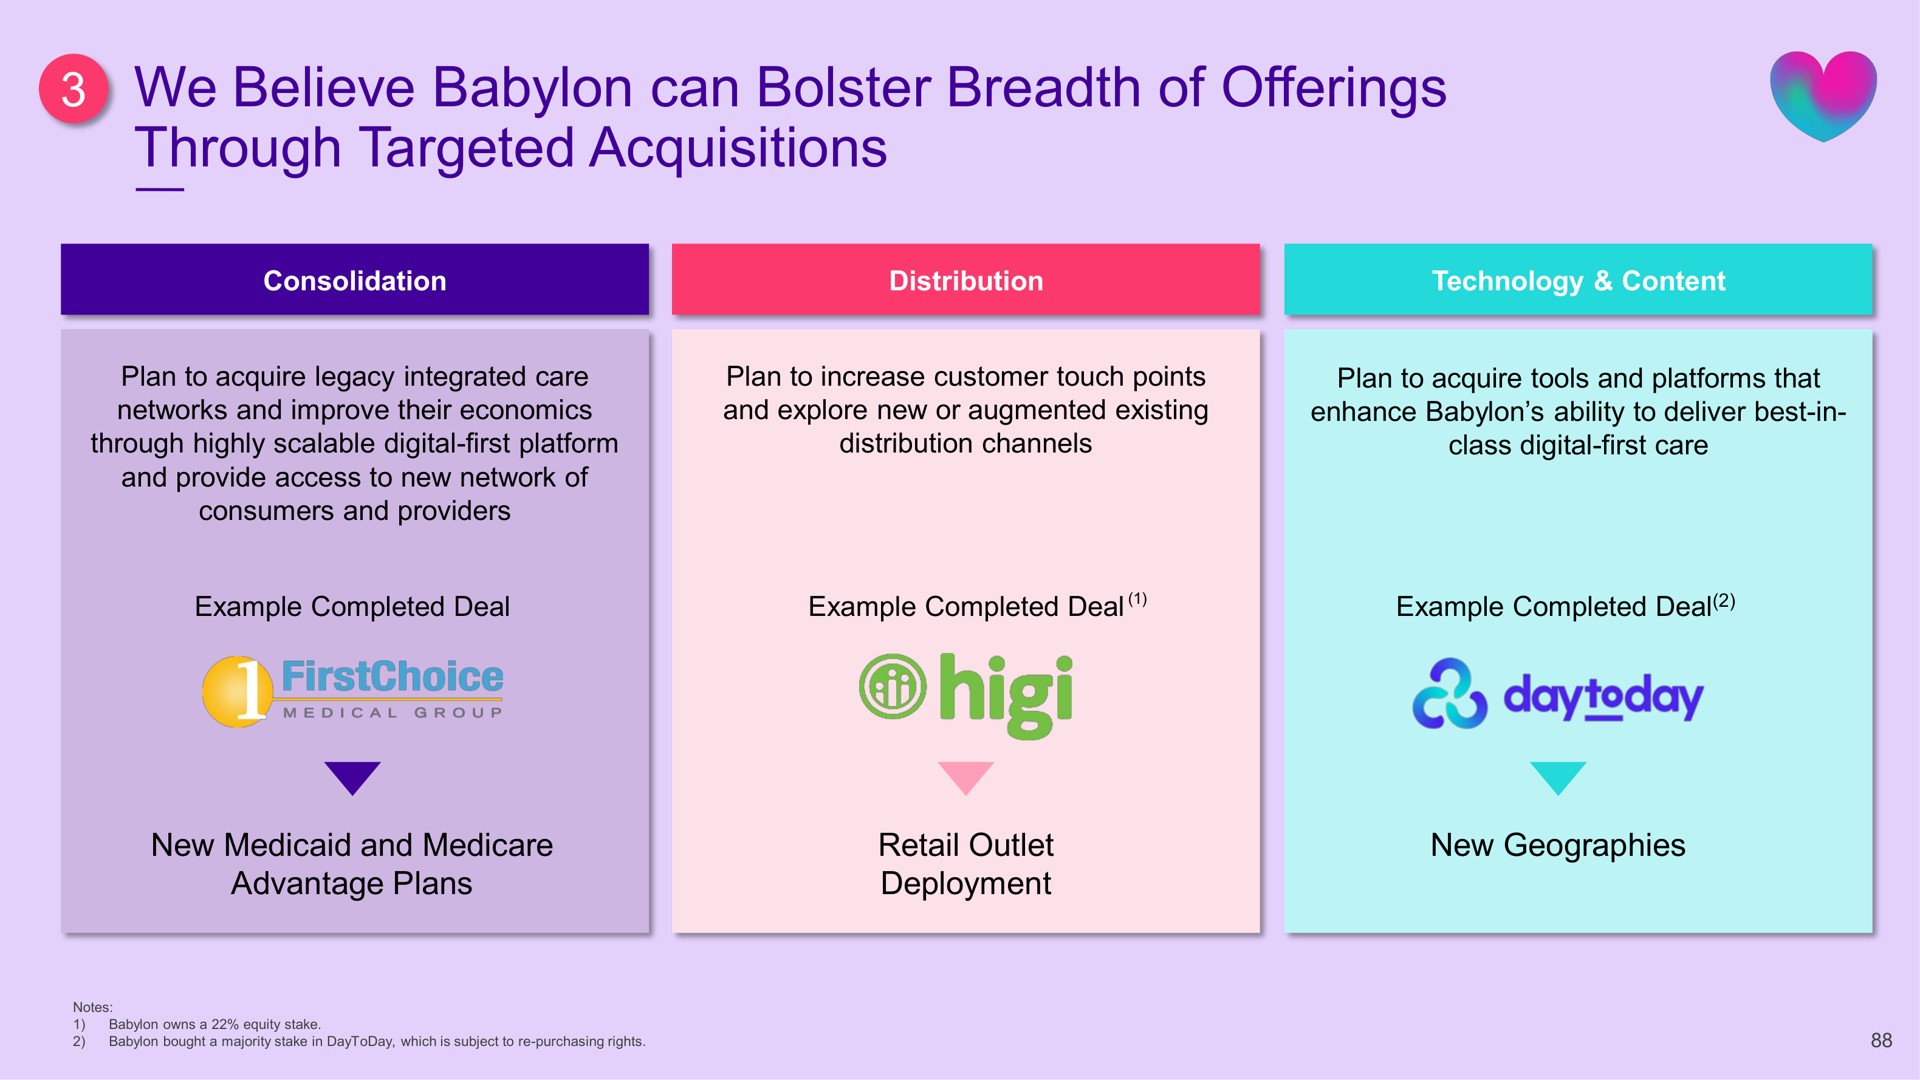 we believe can bolster breadth of offerings through targeted acquisitions | Babylon